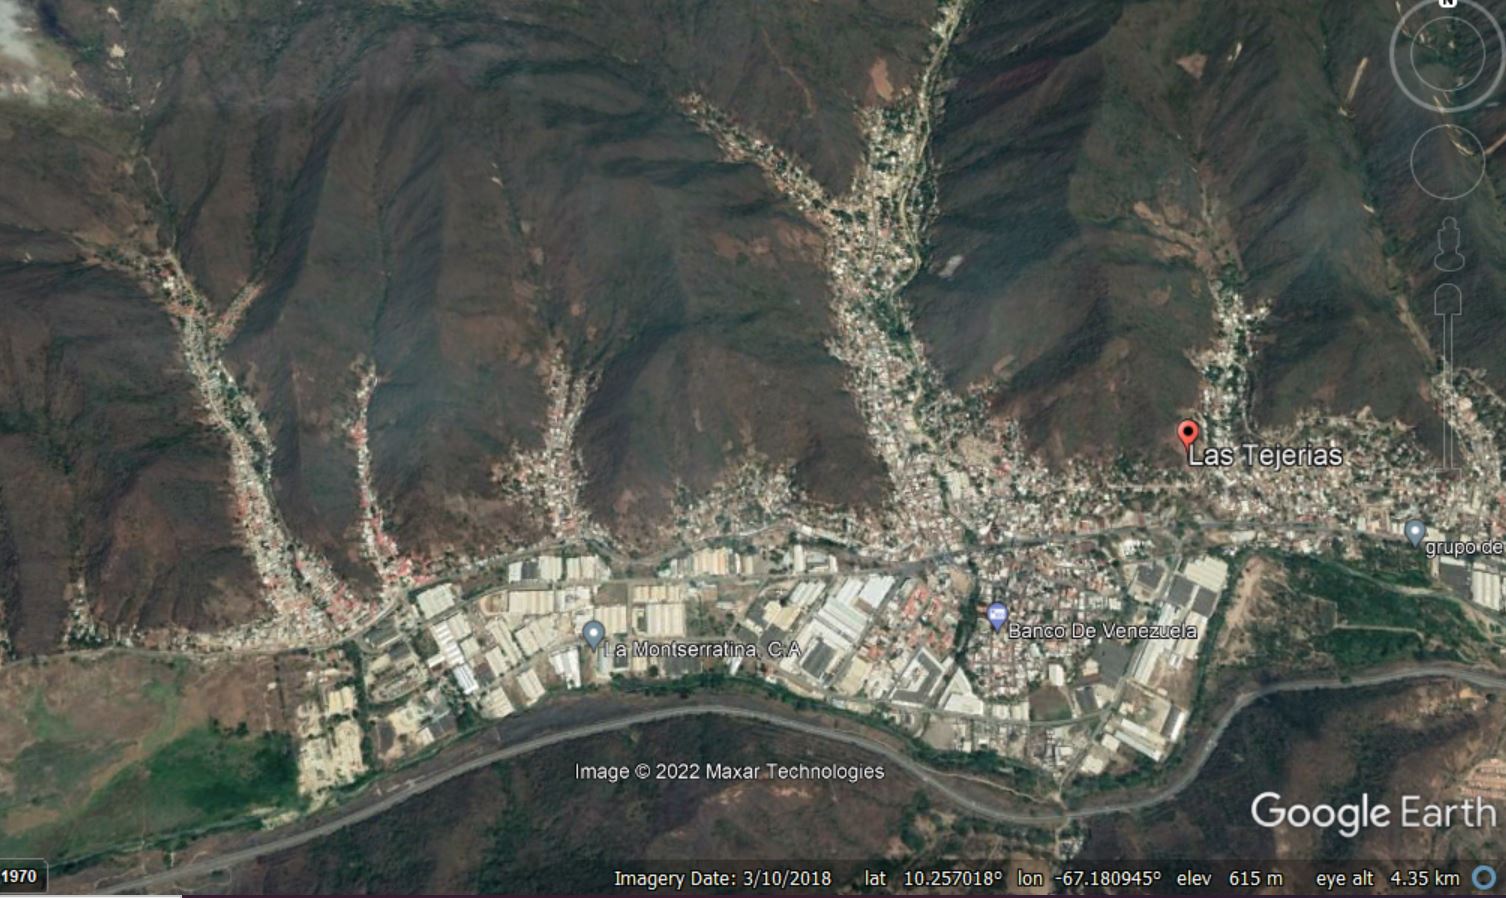 Google Earth view of the densely occupied channels within the town of Las Tejerías in Venezuela.